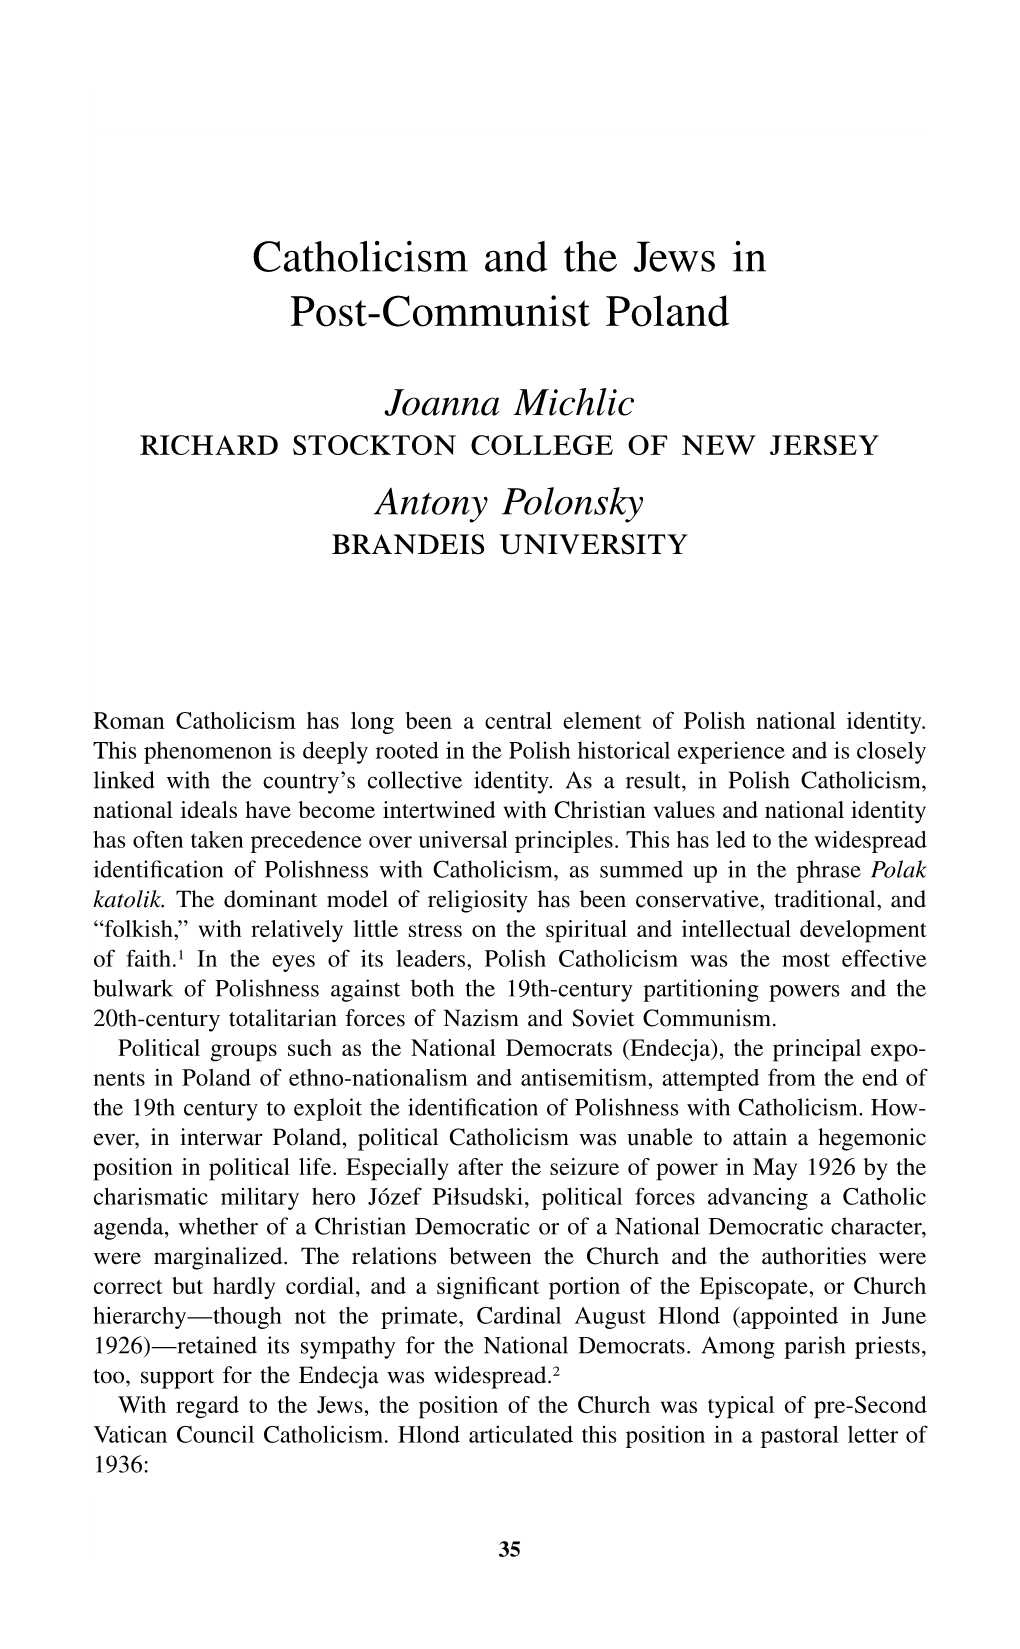 Catholicism and the Jews in Post-Communist Poland